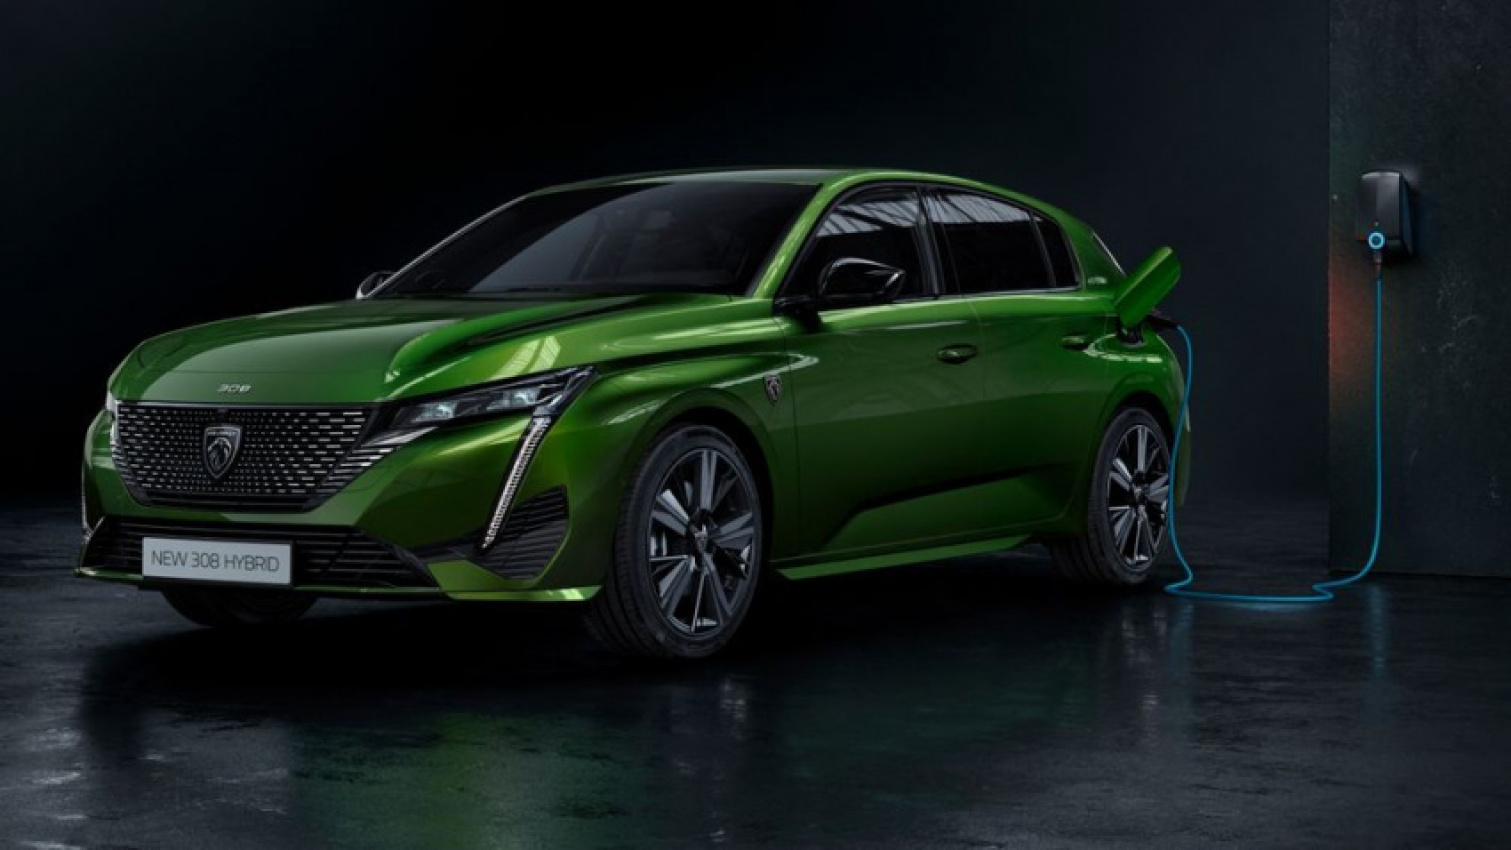 autos, cars, geo, peugeot, auto news, bauto, bermaz, emp2, gt, hatch, hybrid, i-cockpit, phev, puretech, peugeot reveals the all-new 2022 308 hatch in all its sexy green glory